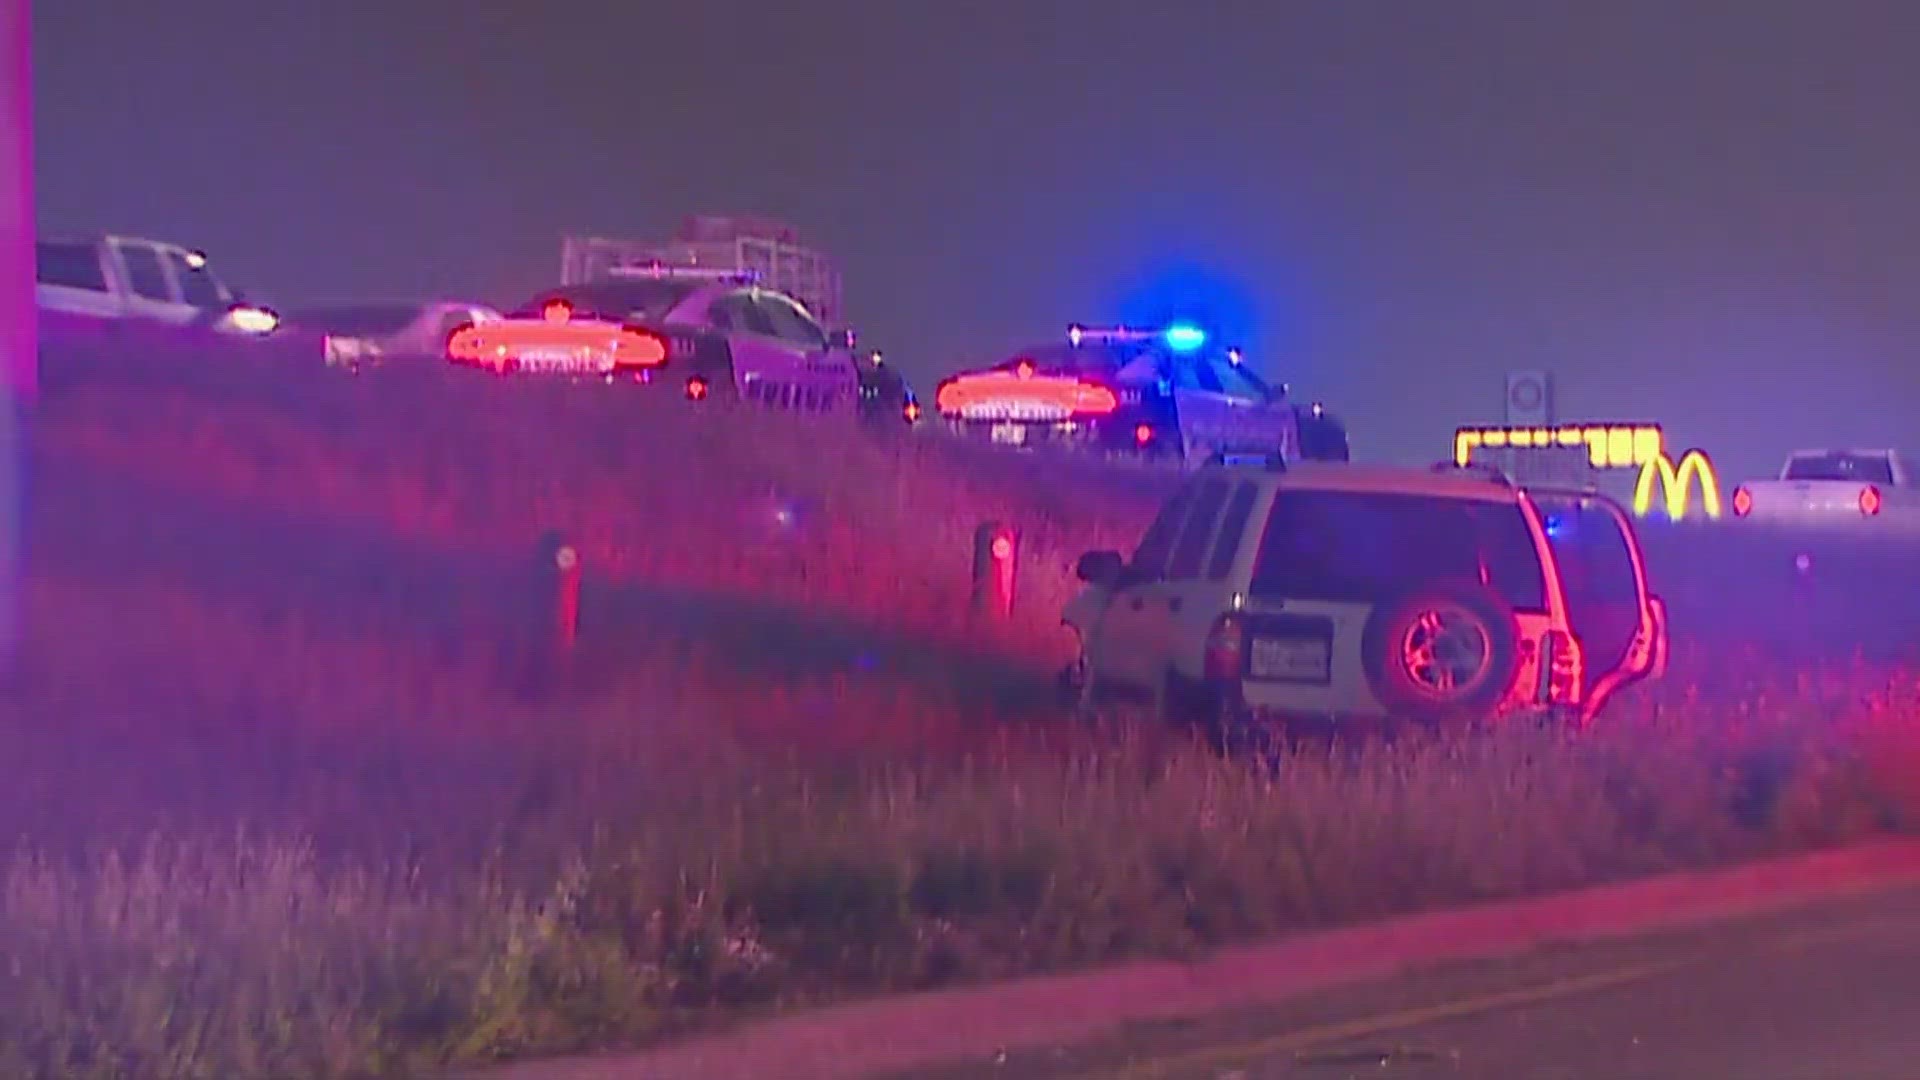 Tashara Parker has the latest updated on the reported Dallas police chase Monday morning.